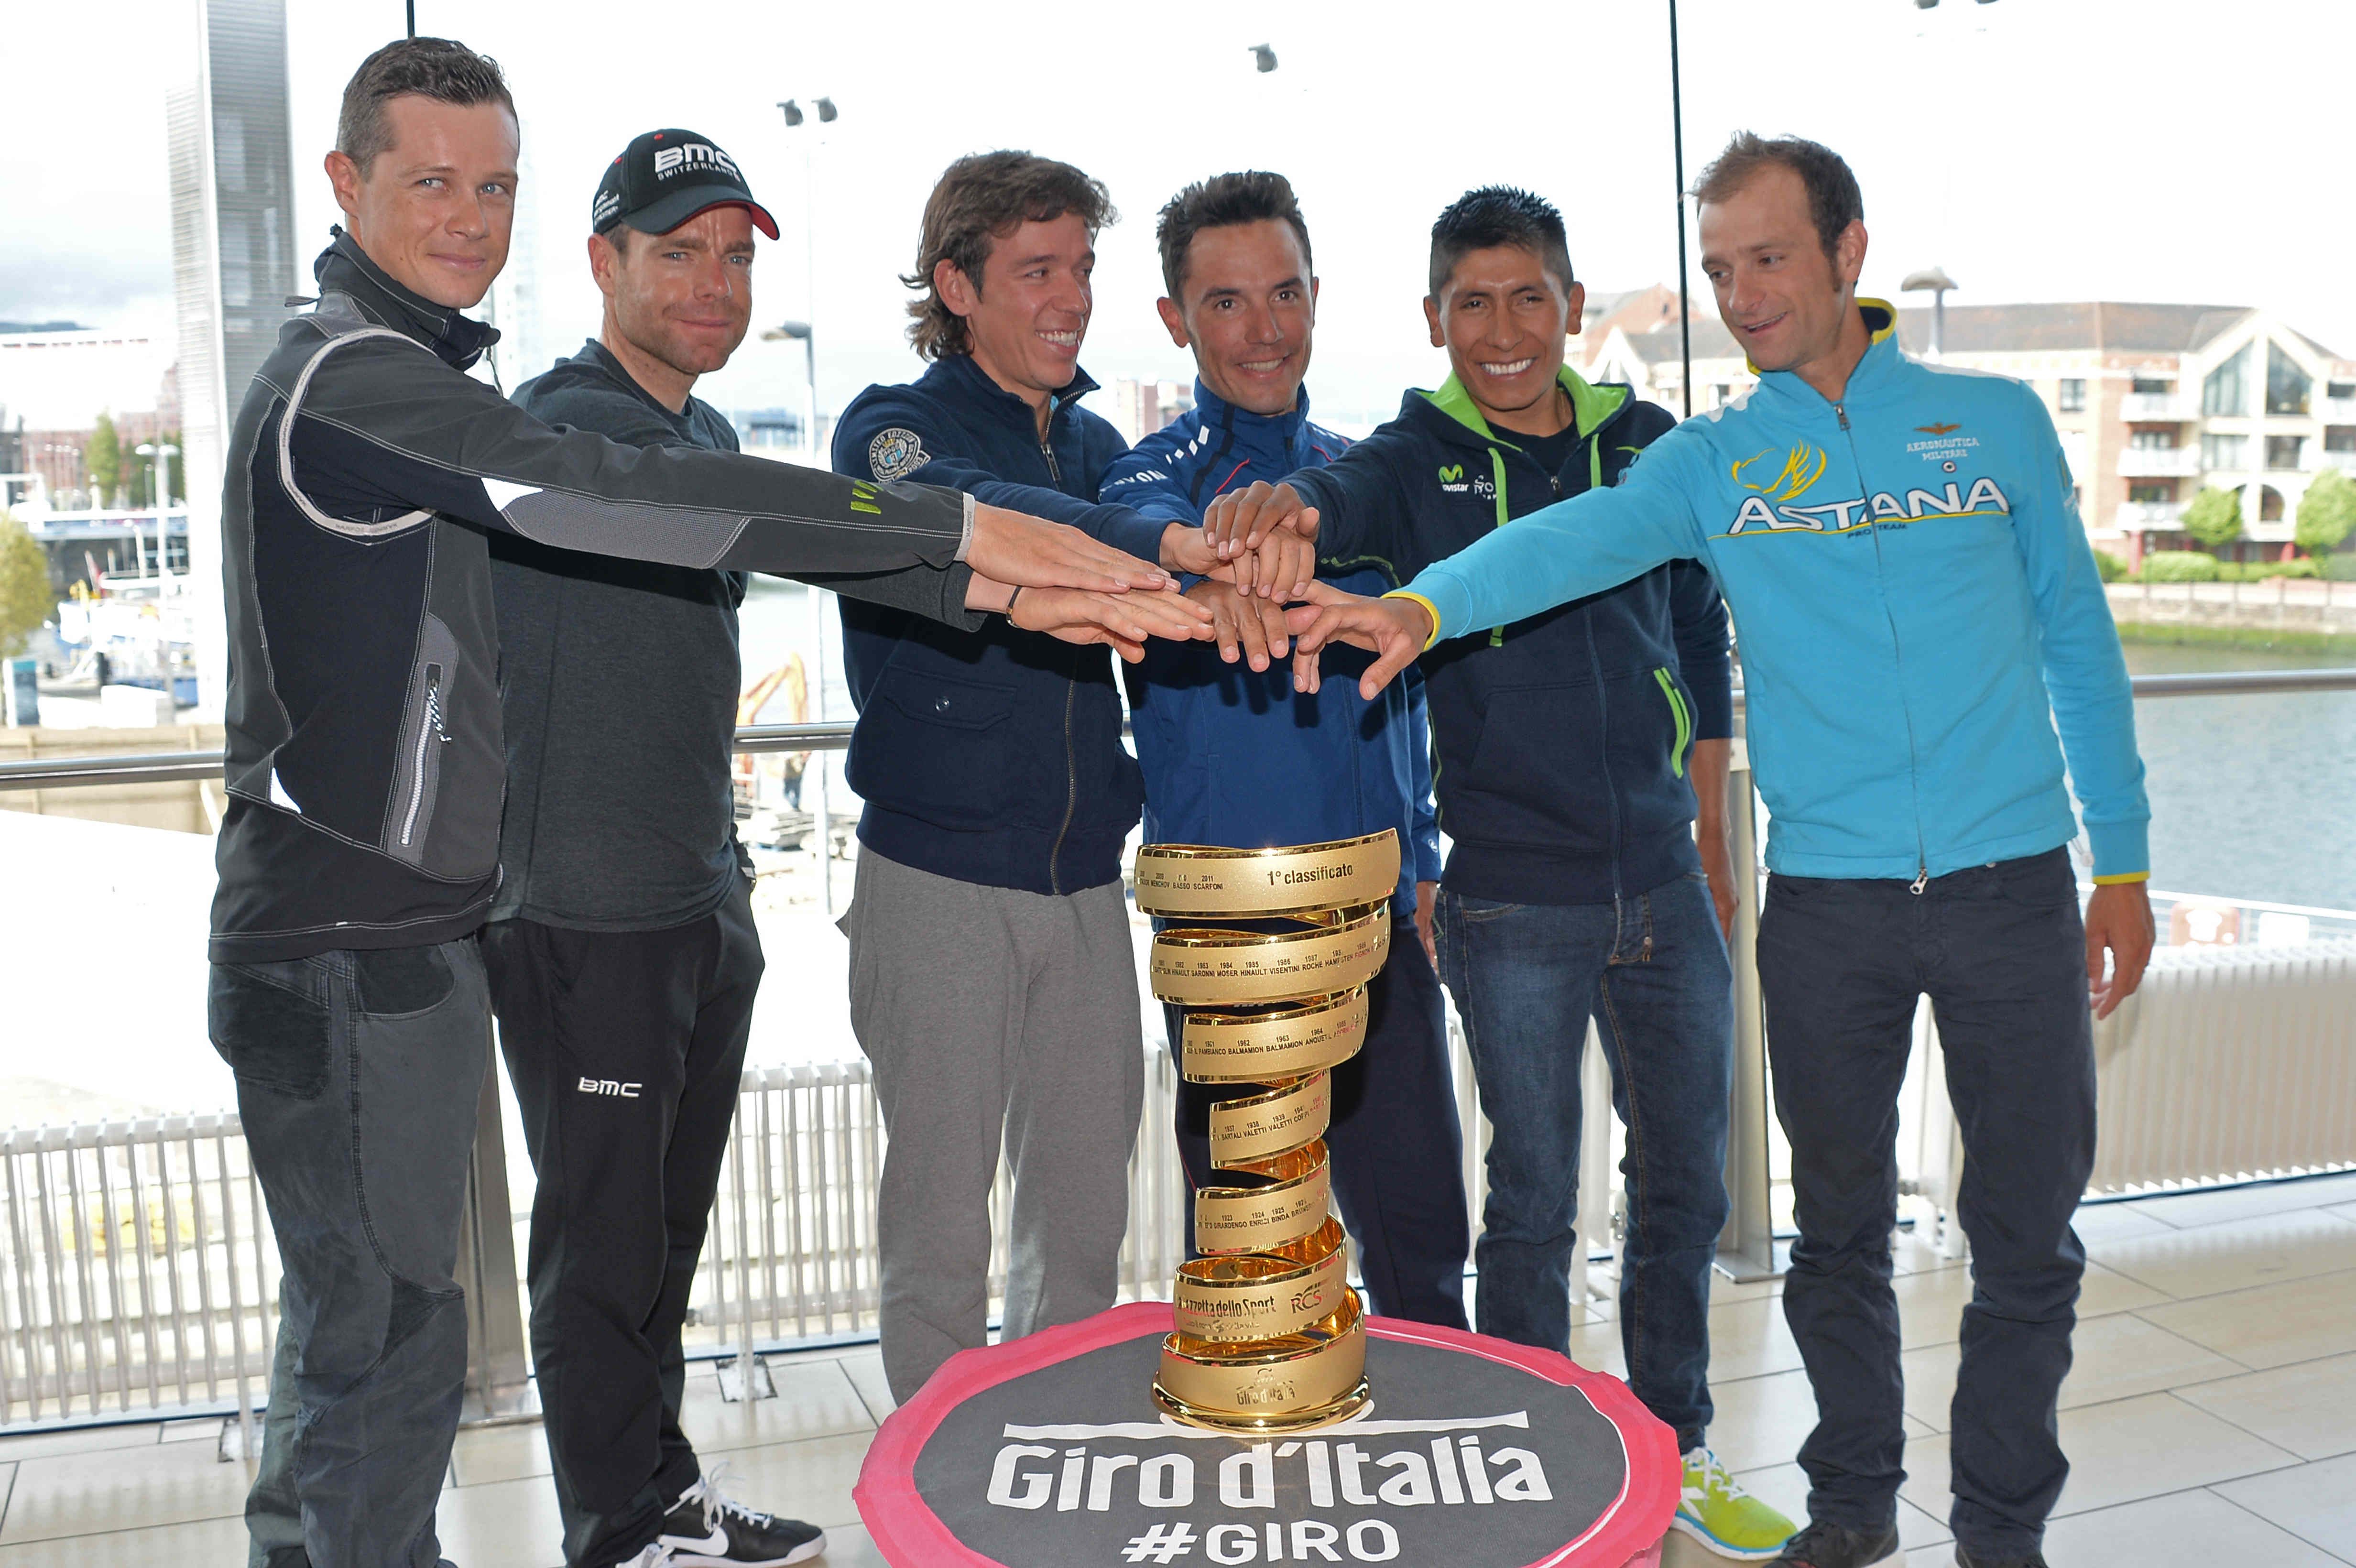 Members of Giro D'Italia getting ready for the race.